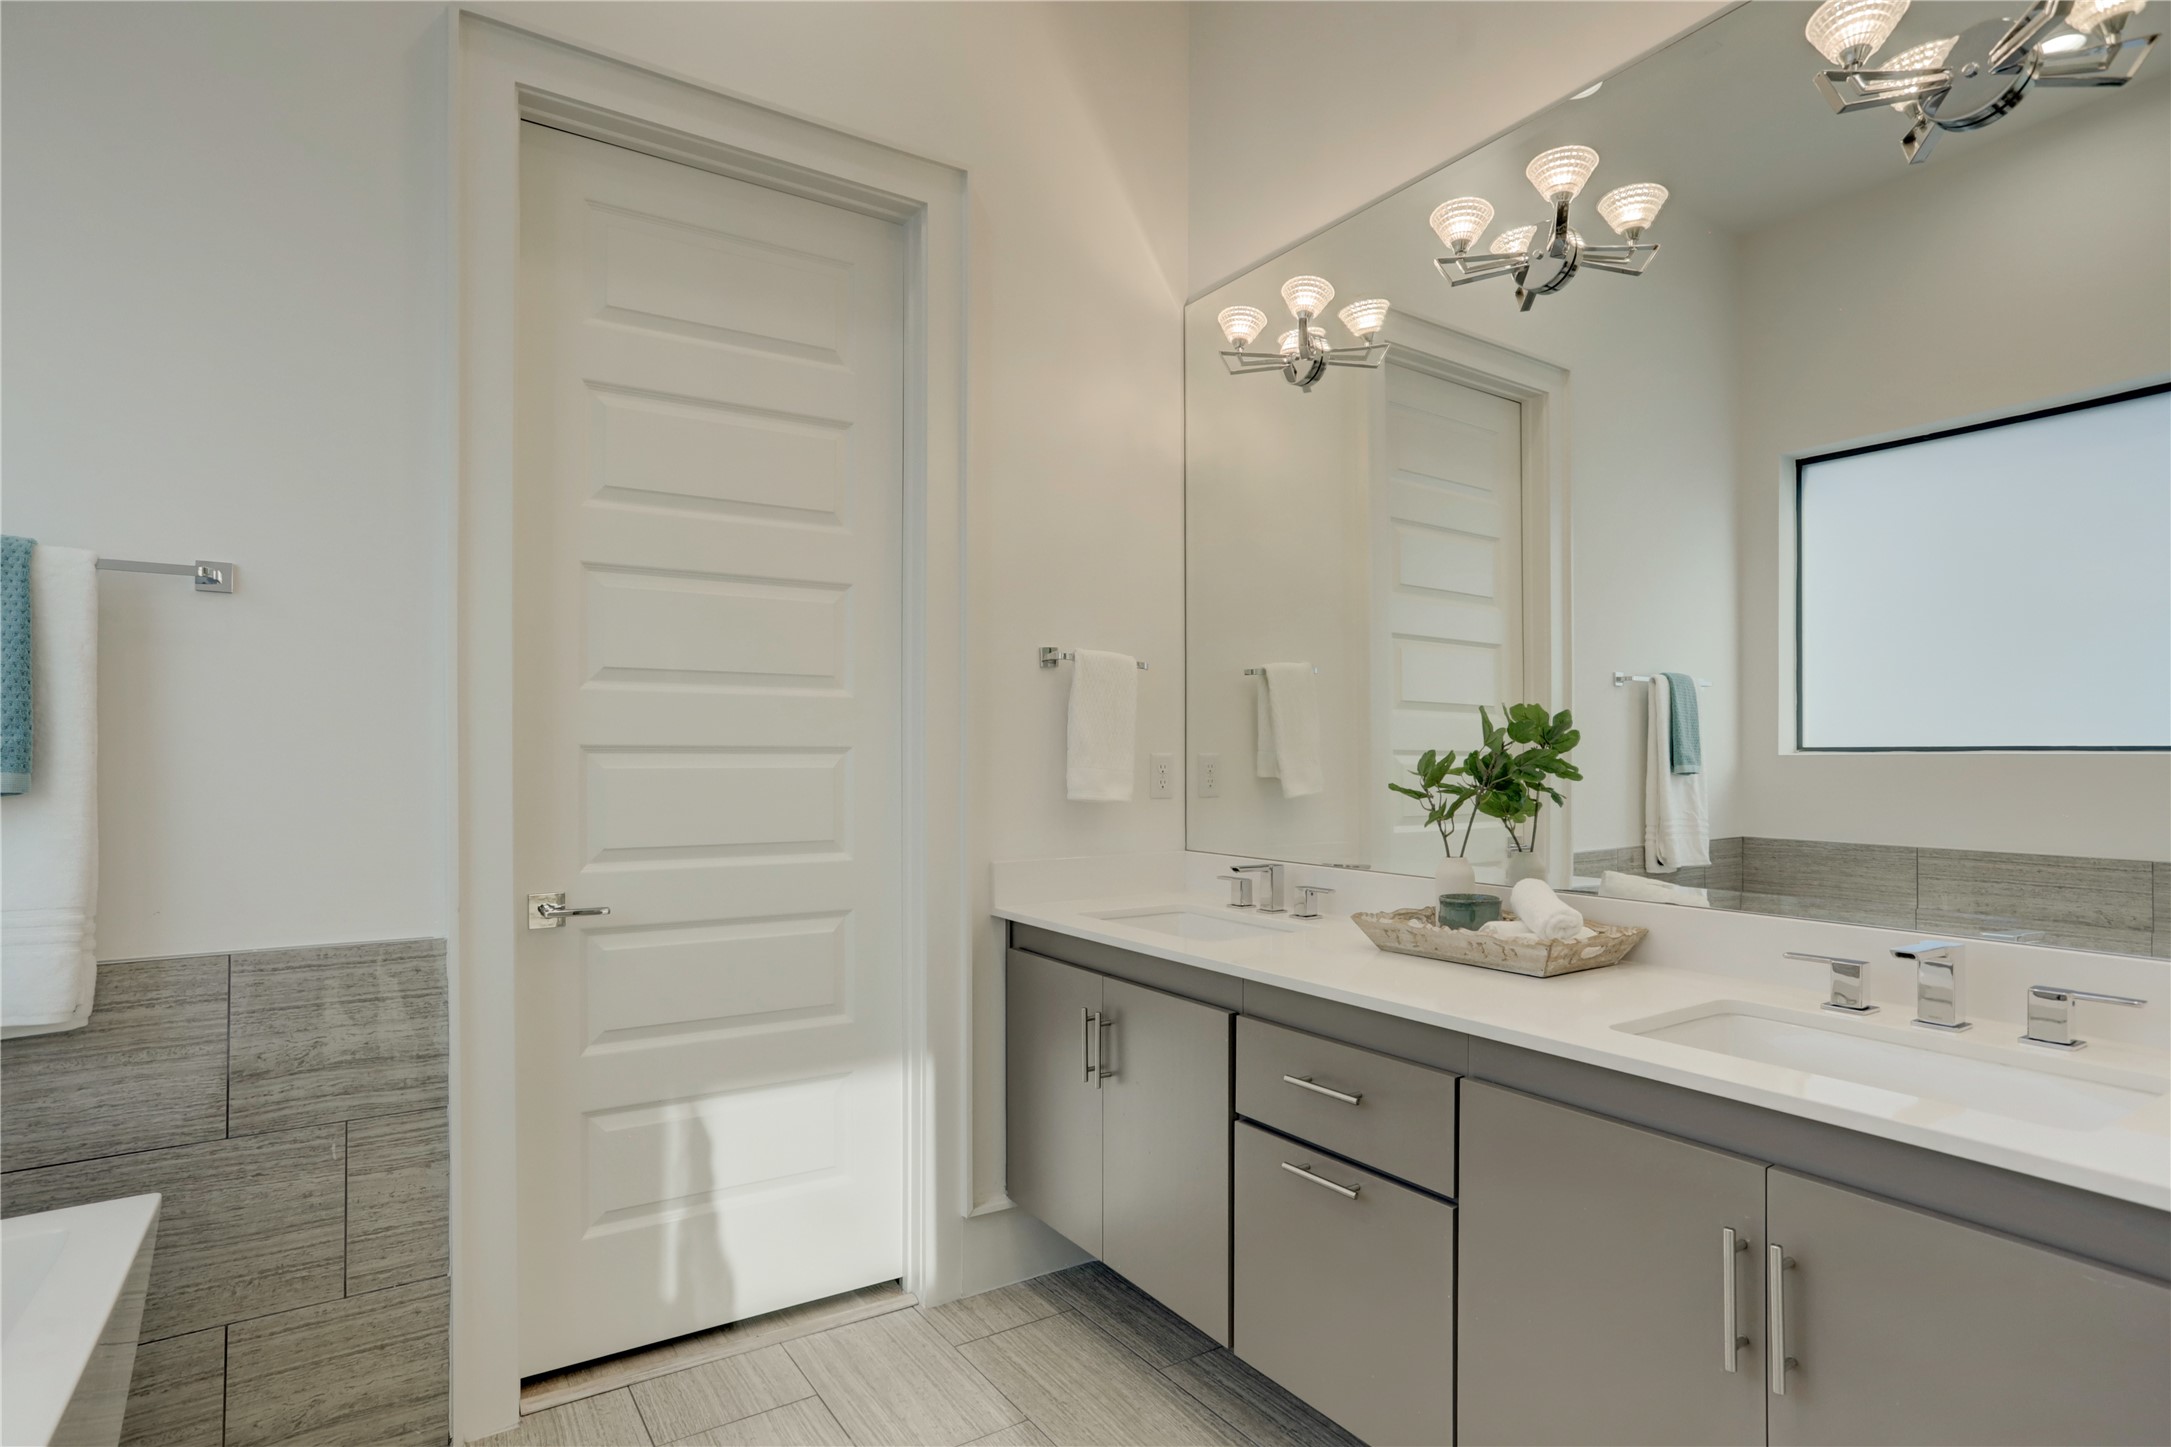 The dual vanities offer ample storage and additional lighting.